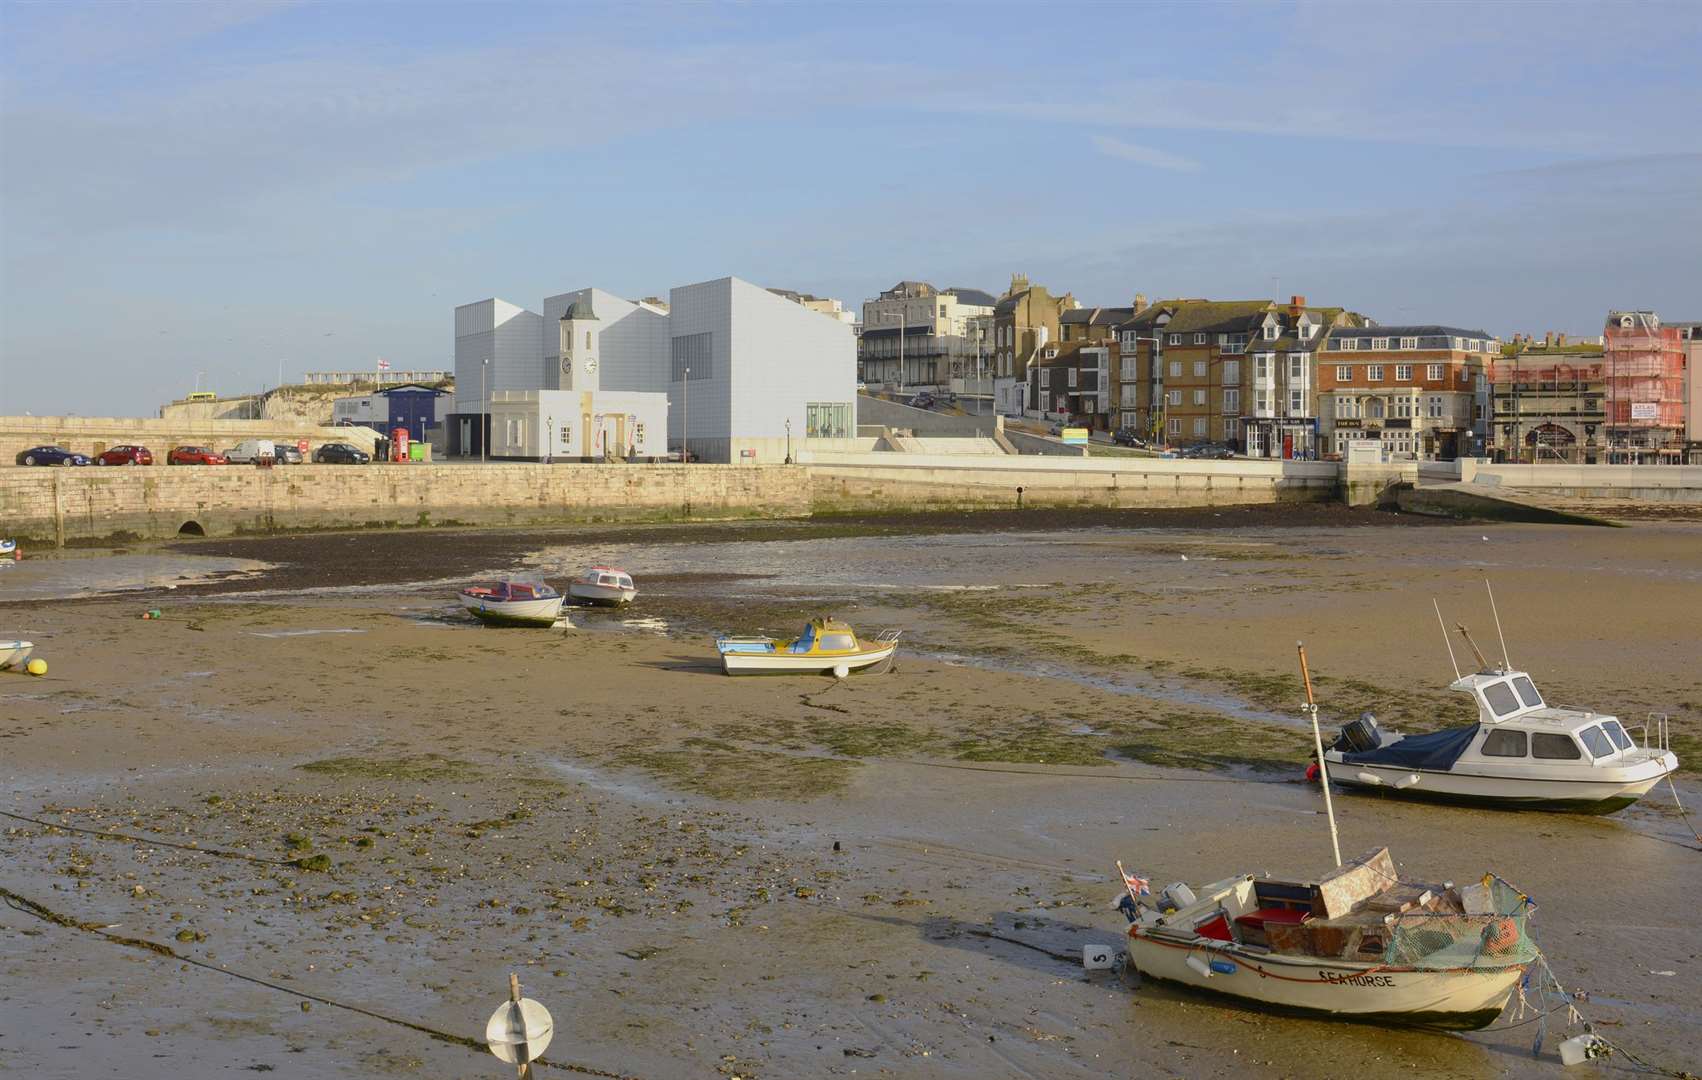 The Turner Contemporary, which is hosting the 2019 Turner Prize nominations, is singled out in the report